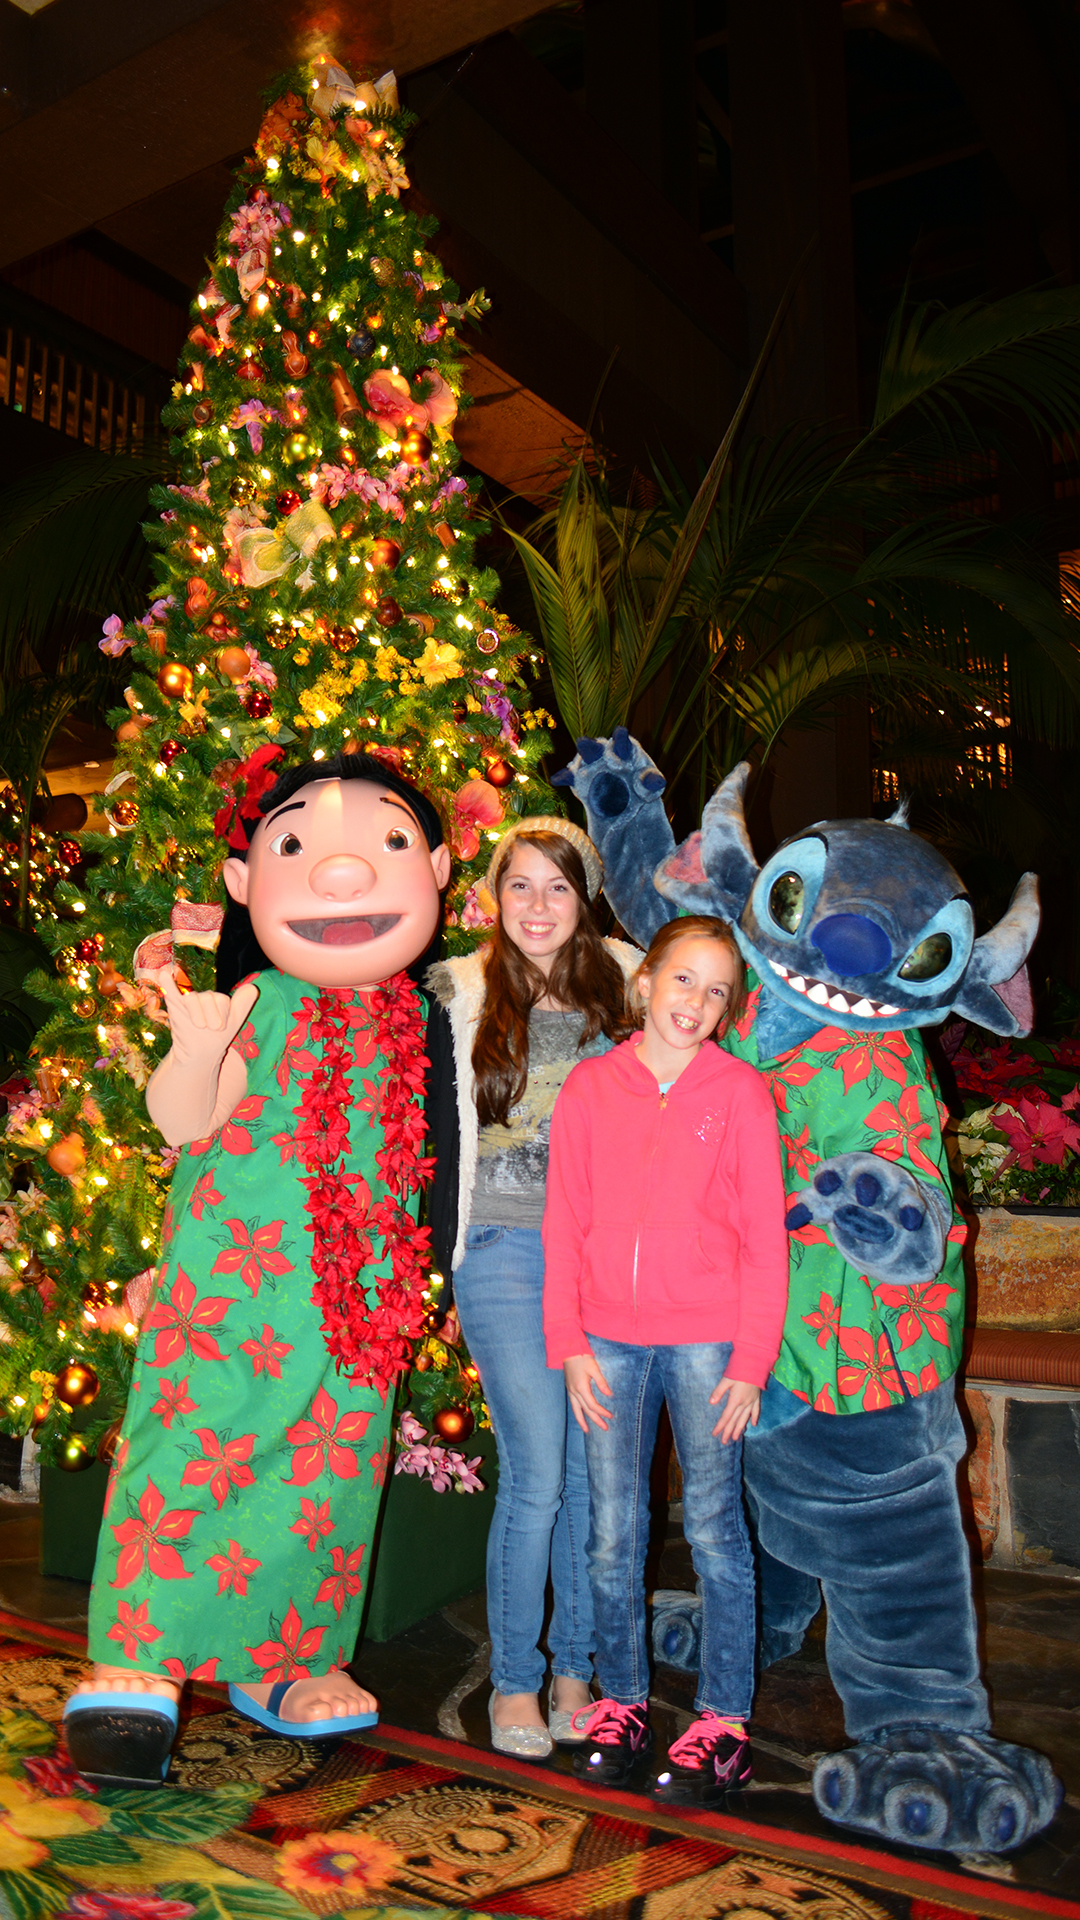 Polynesian Resort Christmas Characters, Lilo and Stitch